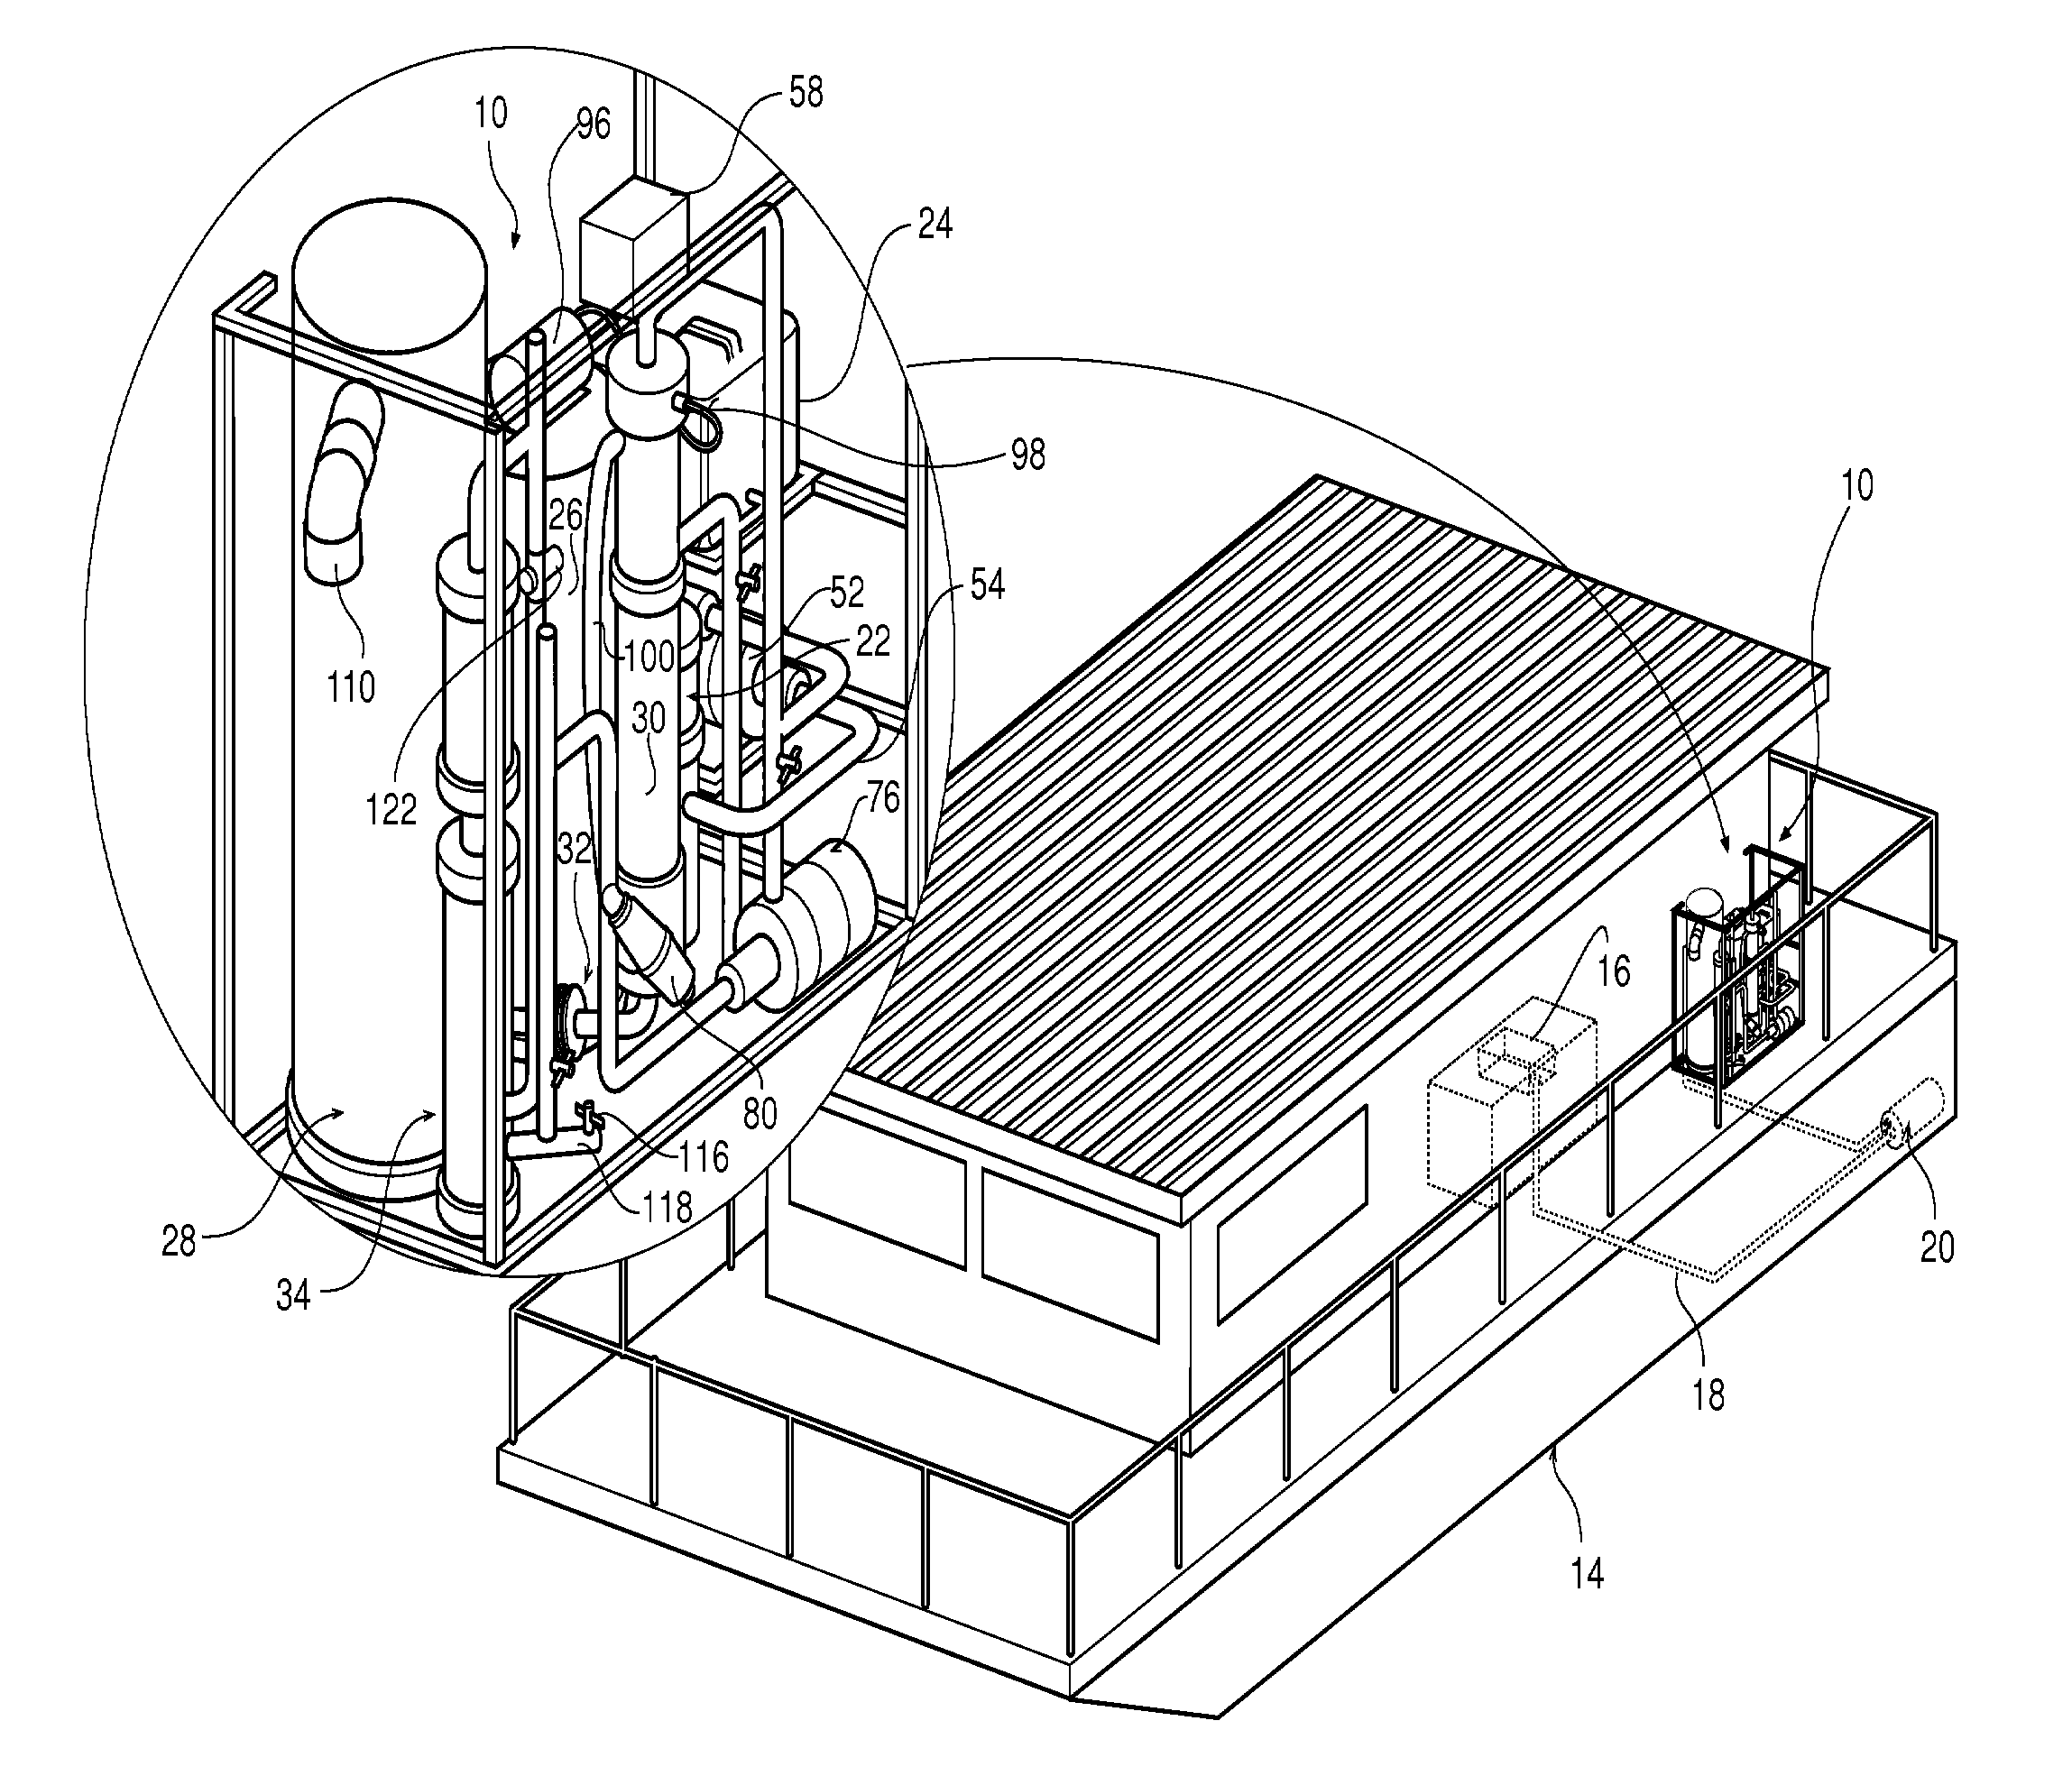 Apparatus and Method for the Treatment of Water